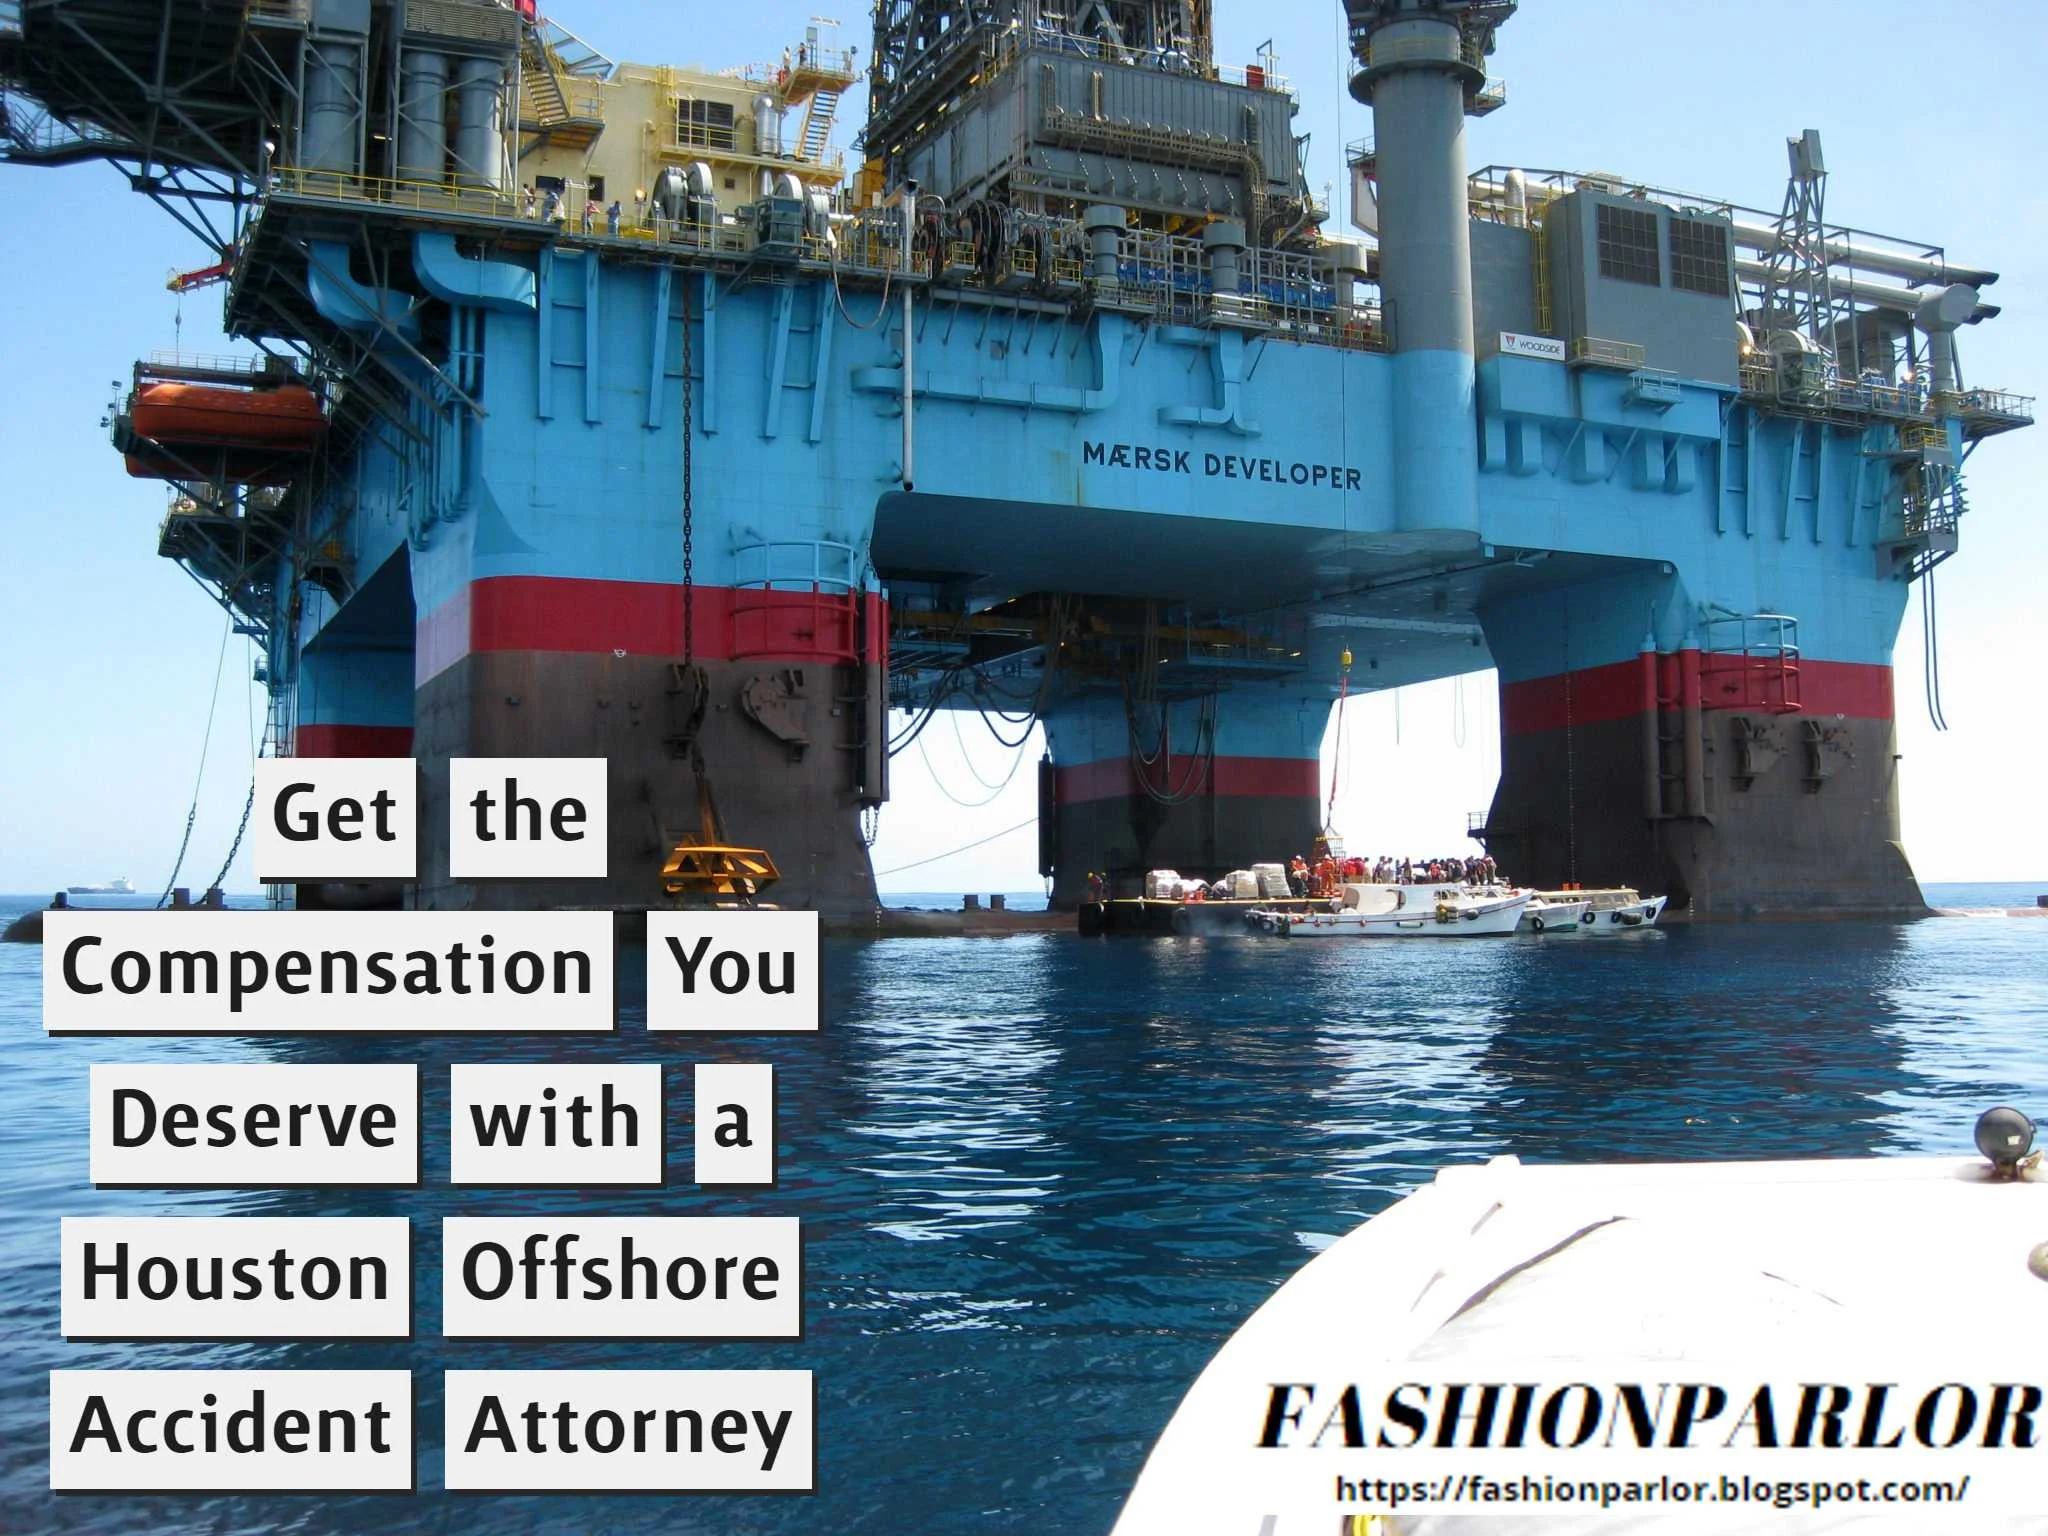 get-the-compensation-you-deserve-with-a-houston-offshore-accident-attorney